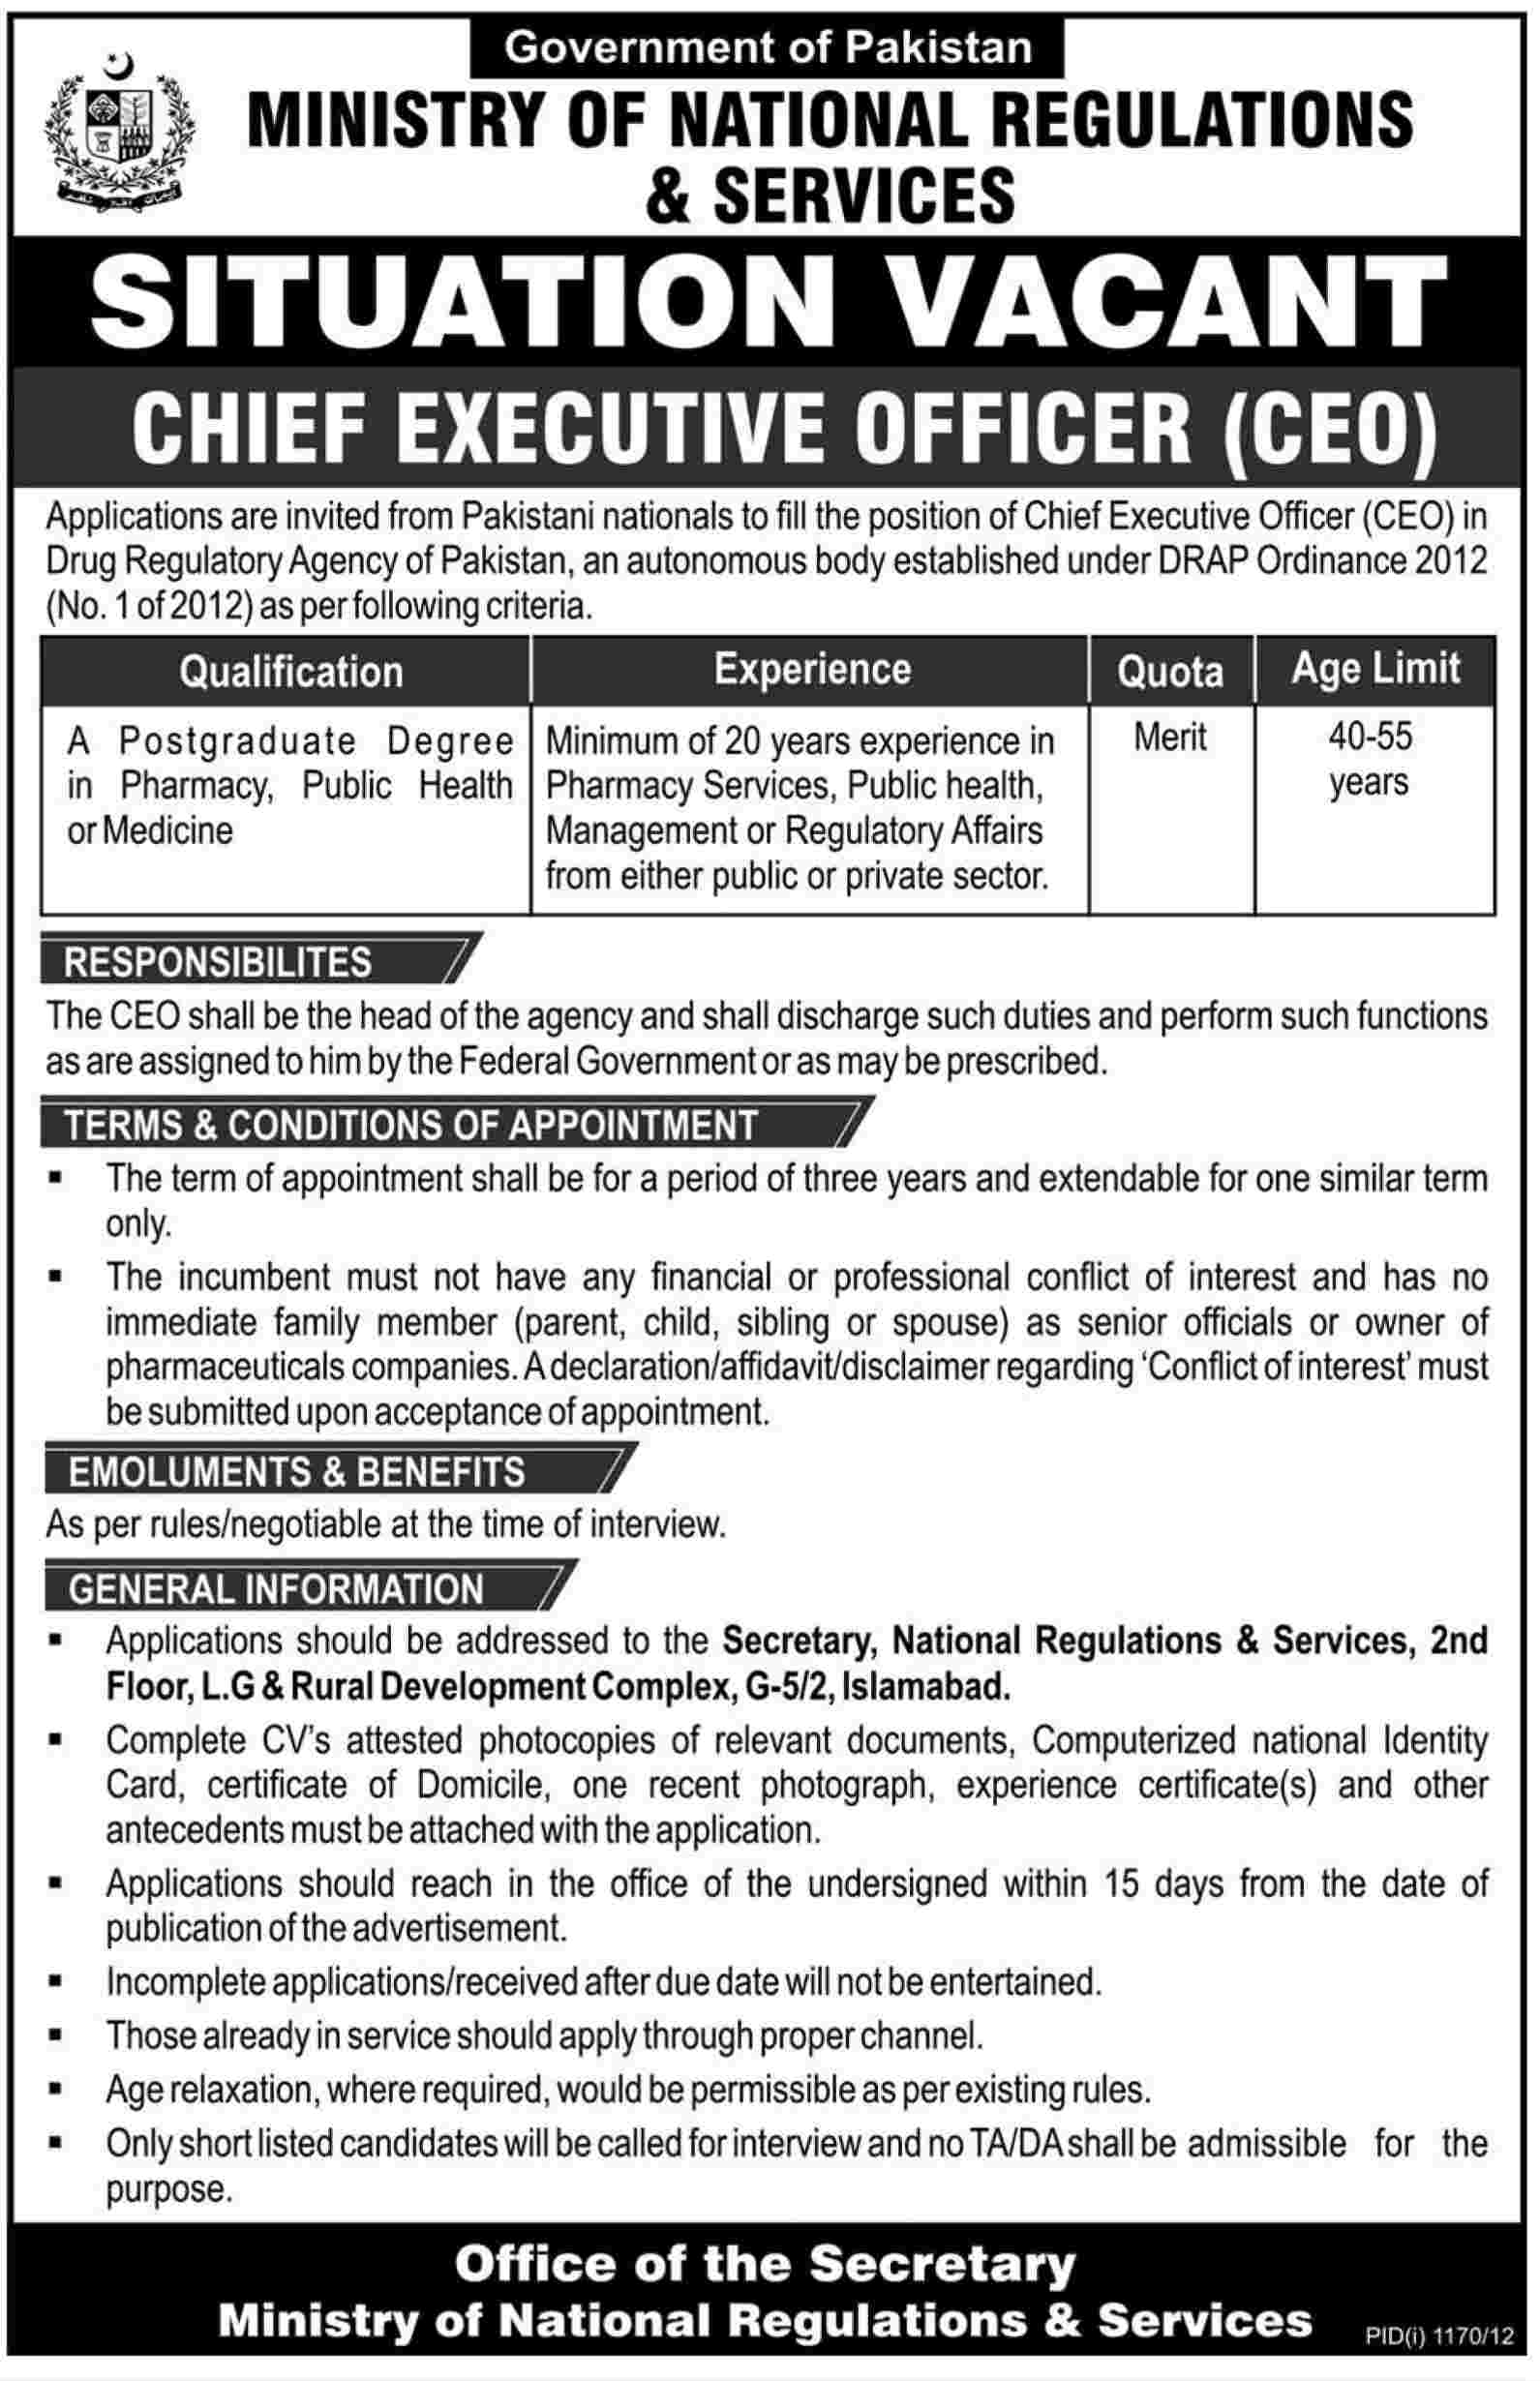 Ministry of National Regulations & Services Requires Chief Executive Officer (Government Job)